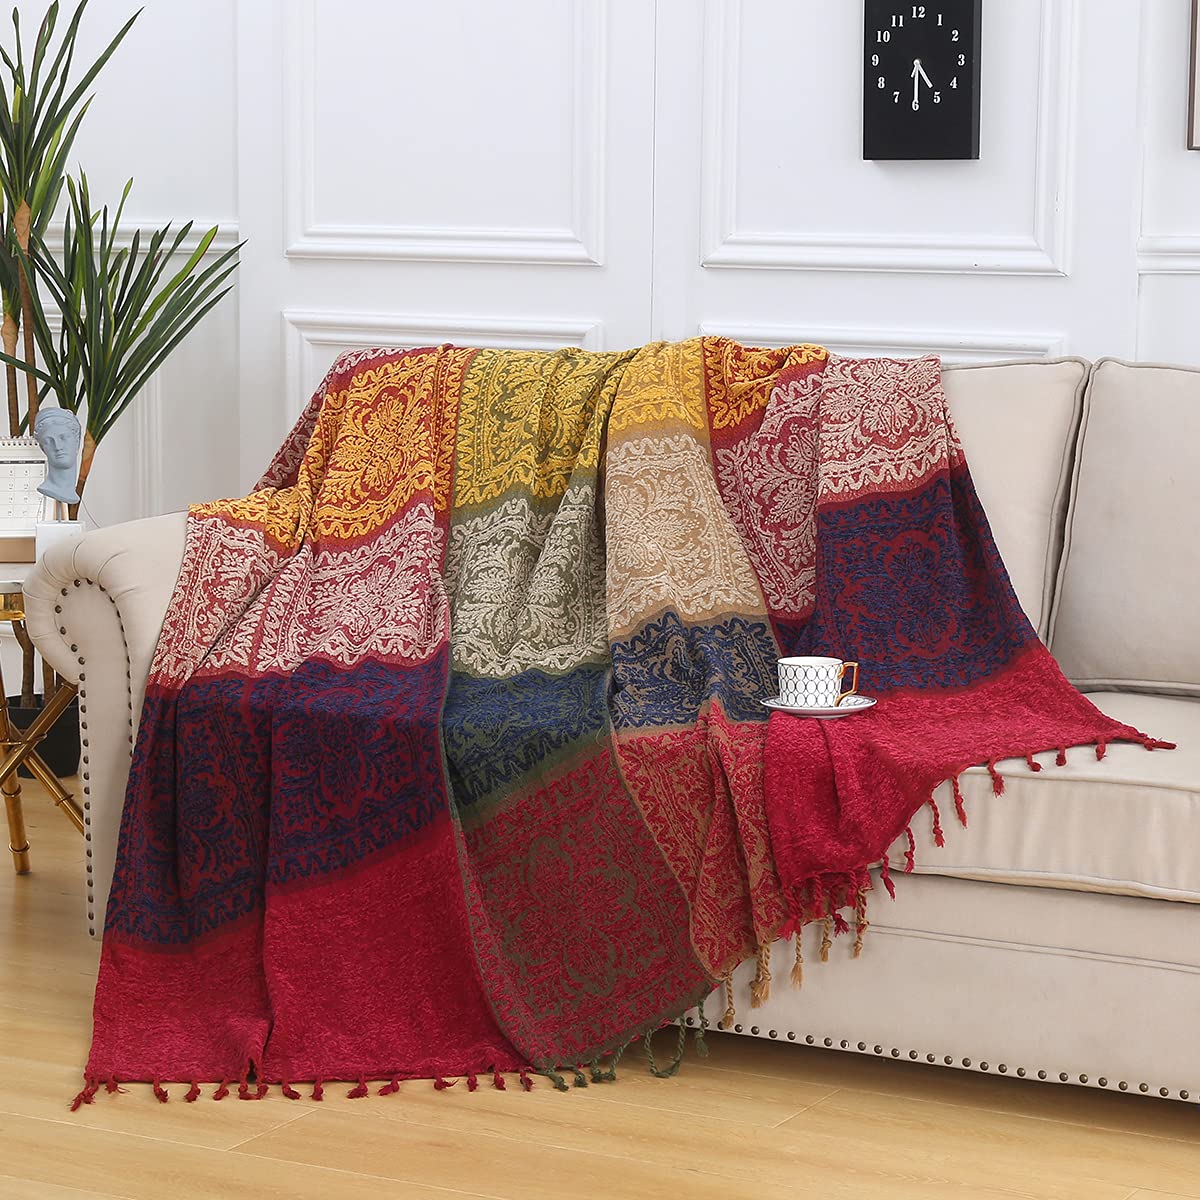 Extra Large Throws for Settees -220*260 CM Chenille Couch Throws for 2 3 4 Seater Sofa,Tartan Blankets and Throws for Bedspreads Armchairs Furniture King Size Bed Throw Cover